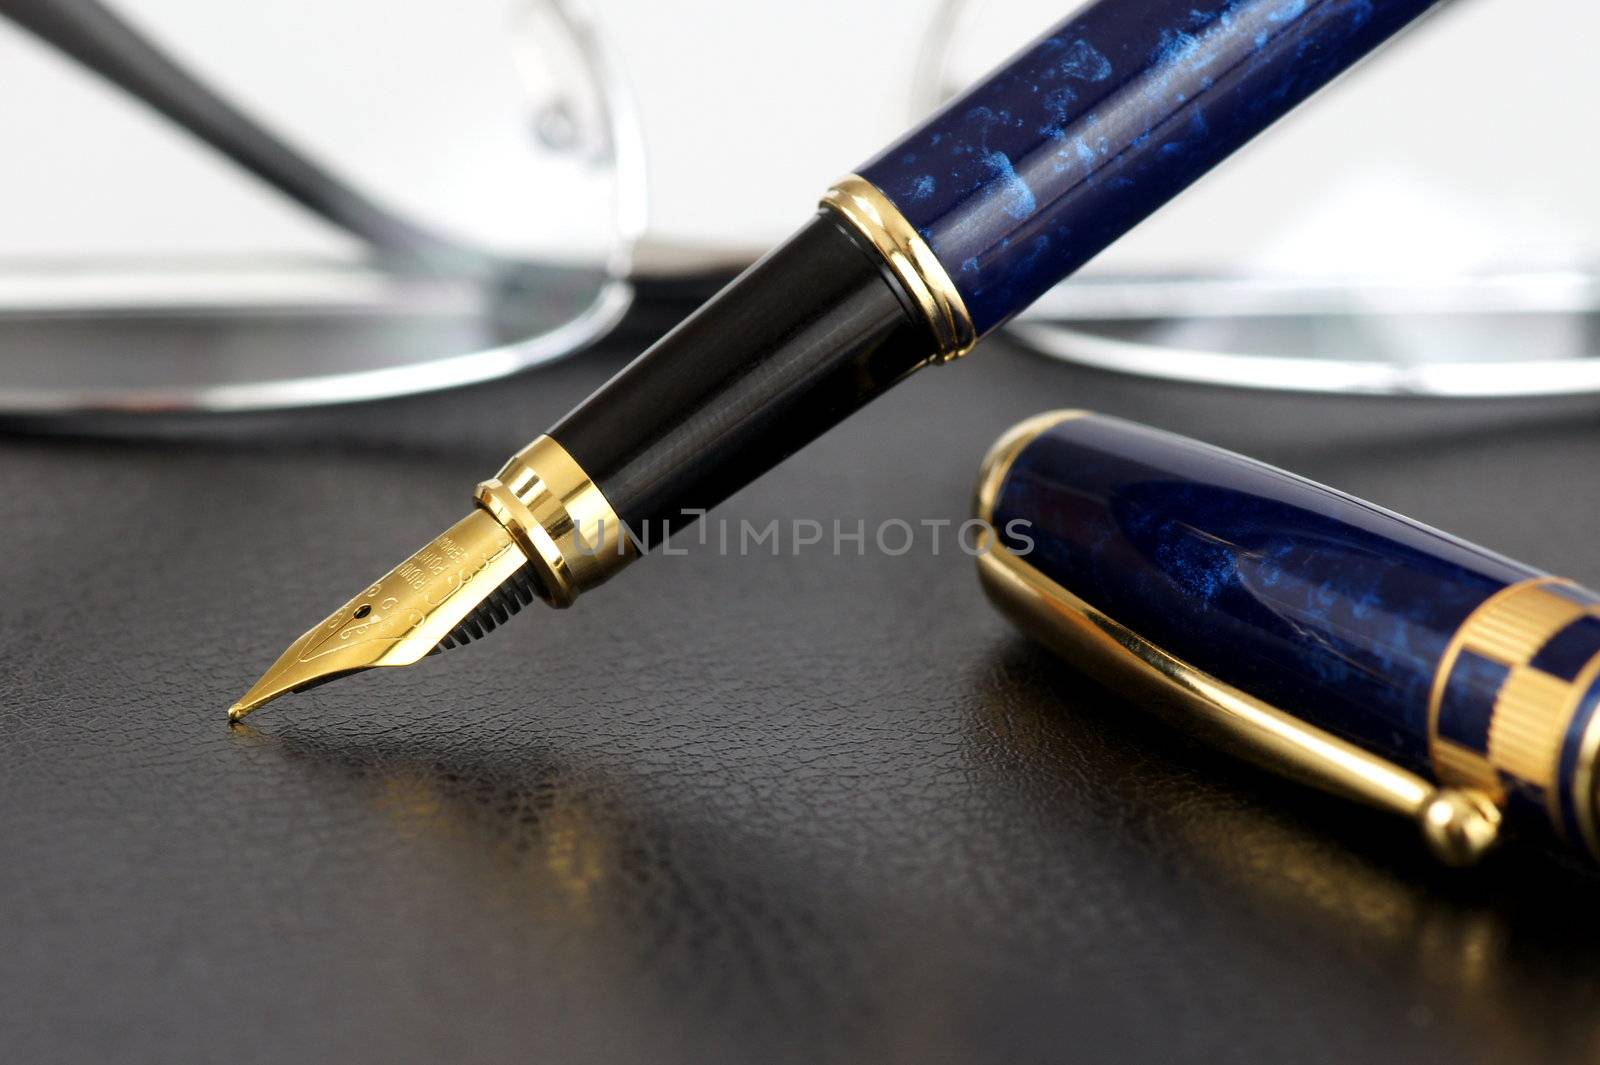 Fountain pen by Pajomend